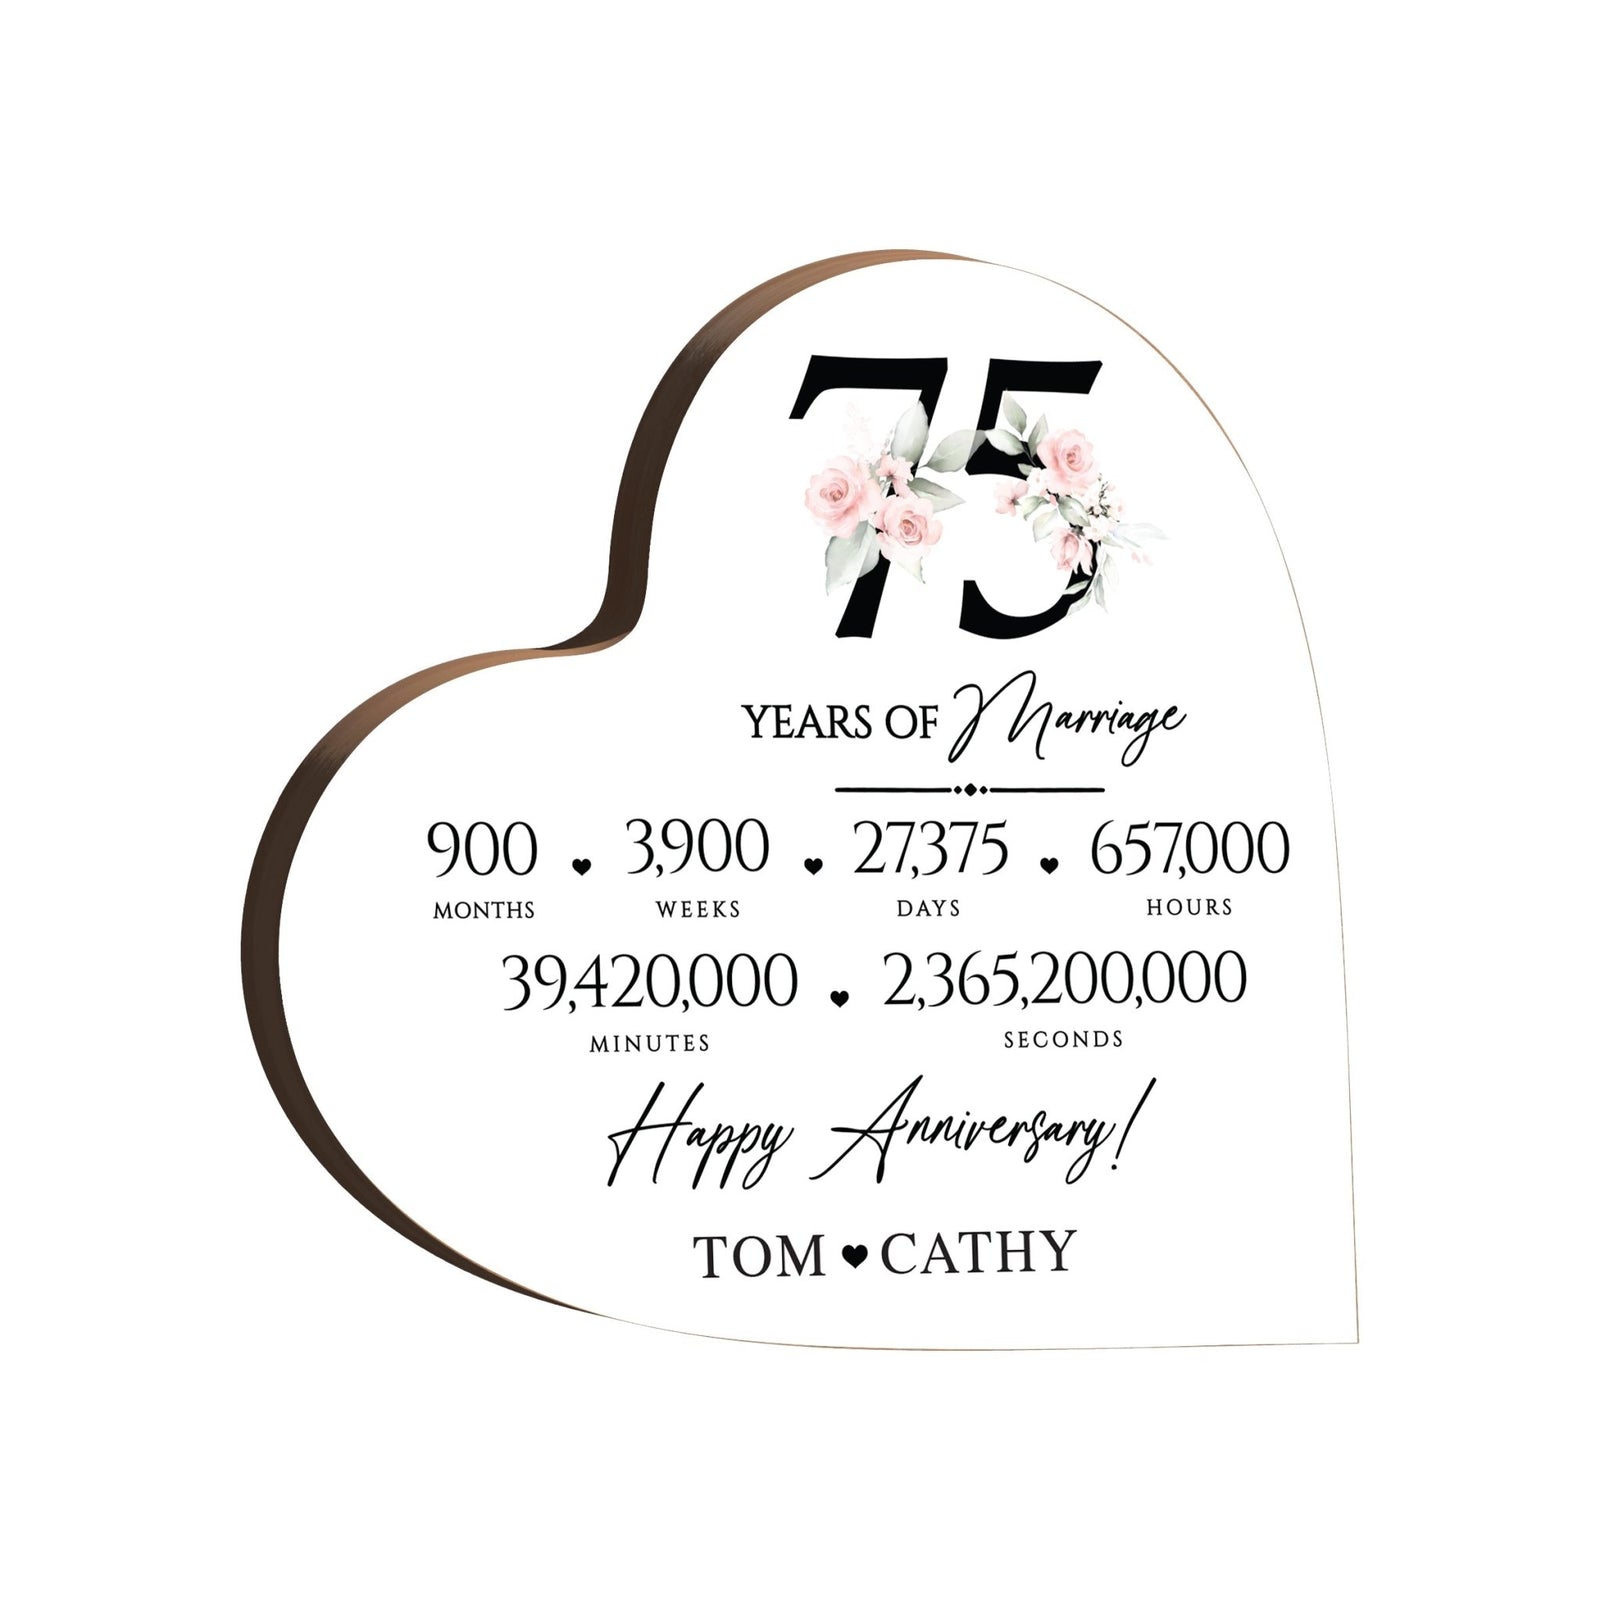 Personalized Wooden Anniversary Heart Shaped Signs - 75th Anniversary - LifeSong Milestones